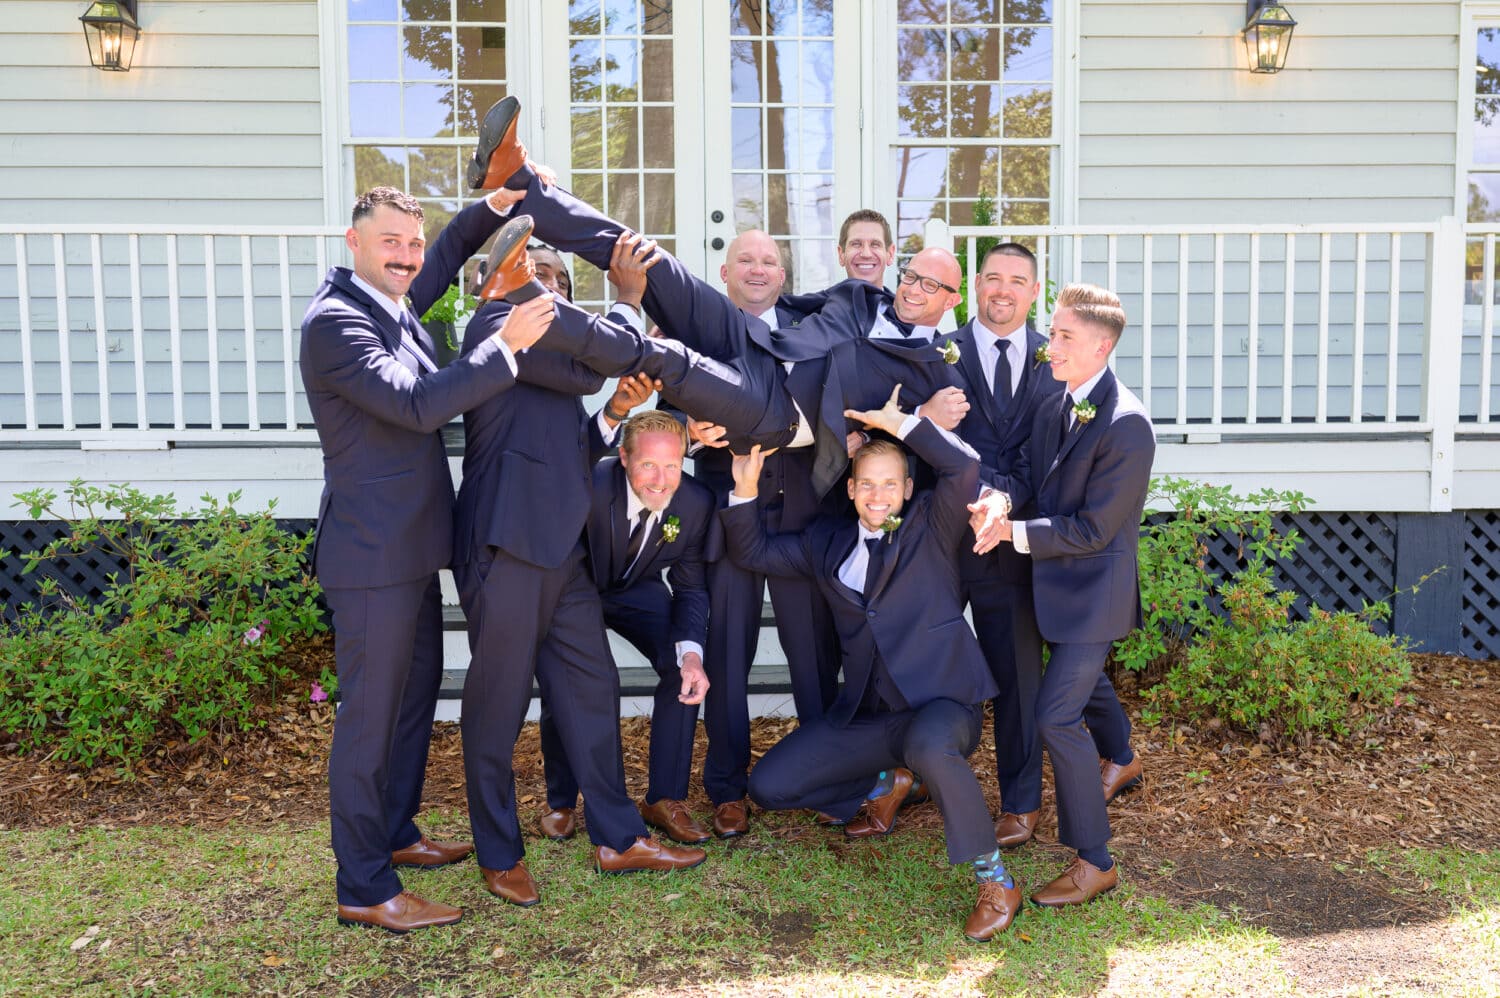 Fun picture with the groomsmen - The Village House at Litchfield